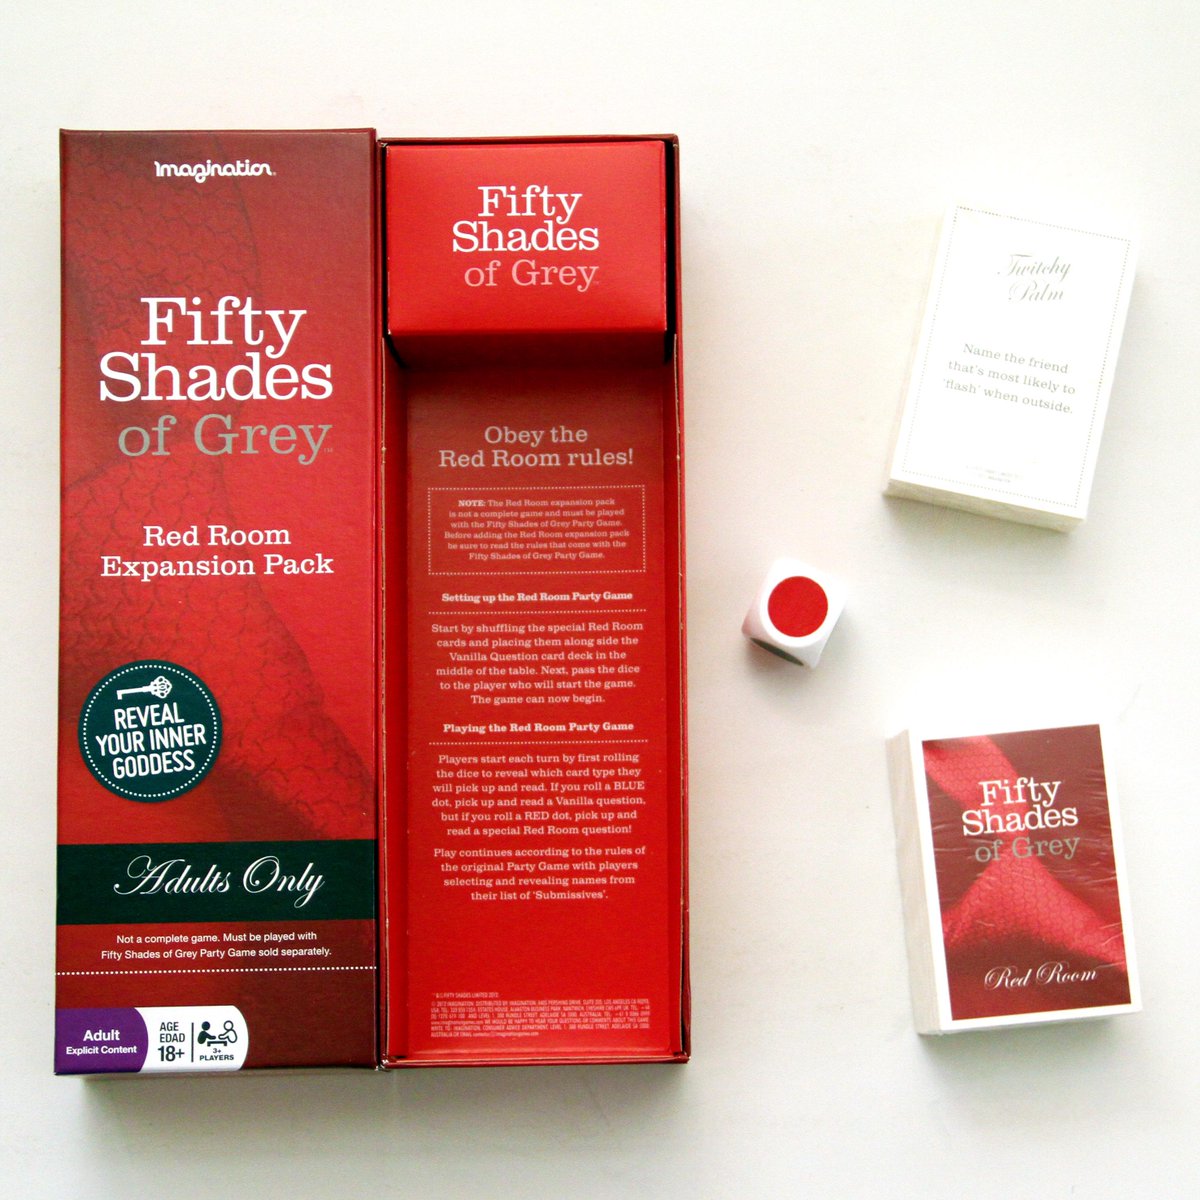 Fifty Shades of Grey Red Room Expansion Pack RRP 13.99 CLEARANCE XL 7.99